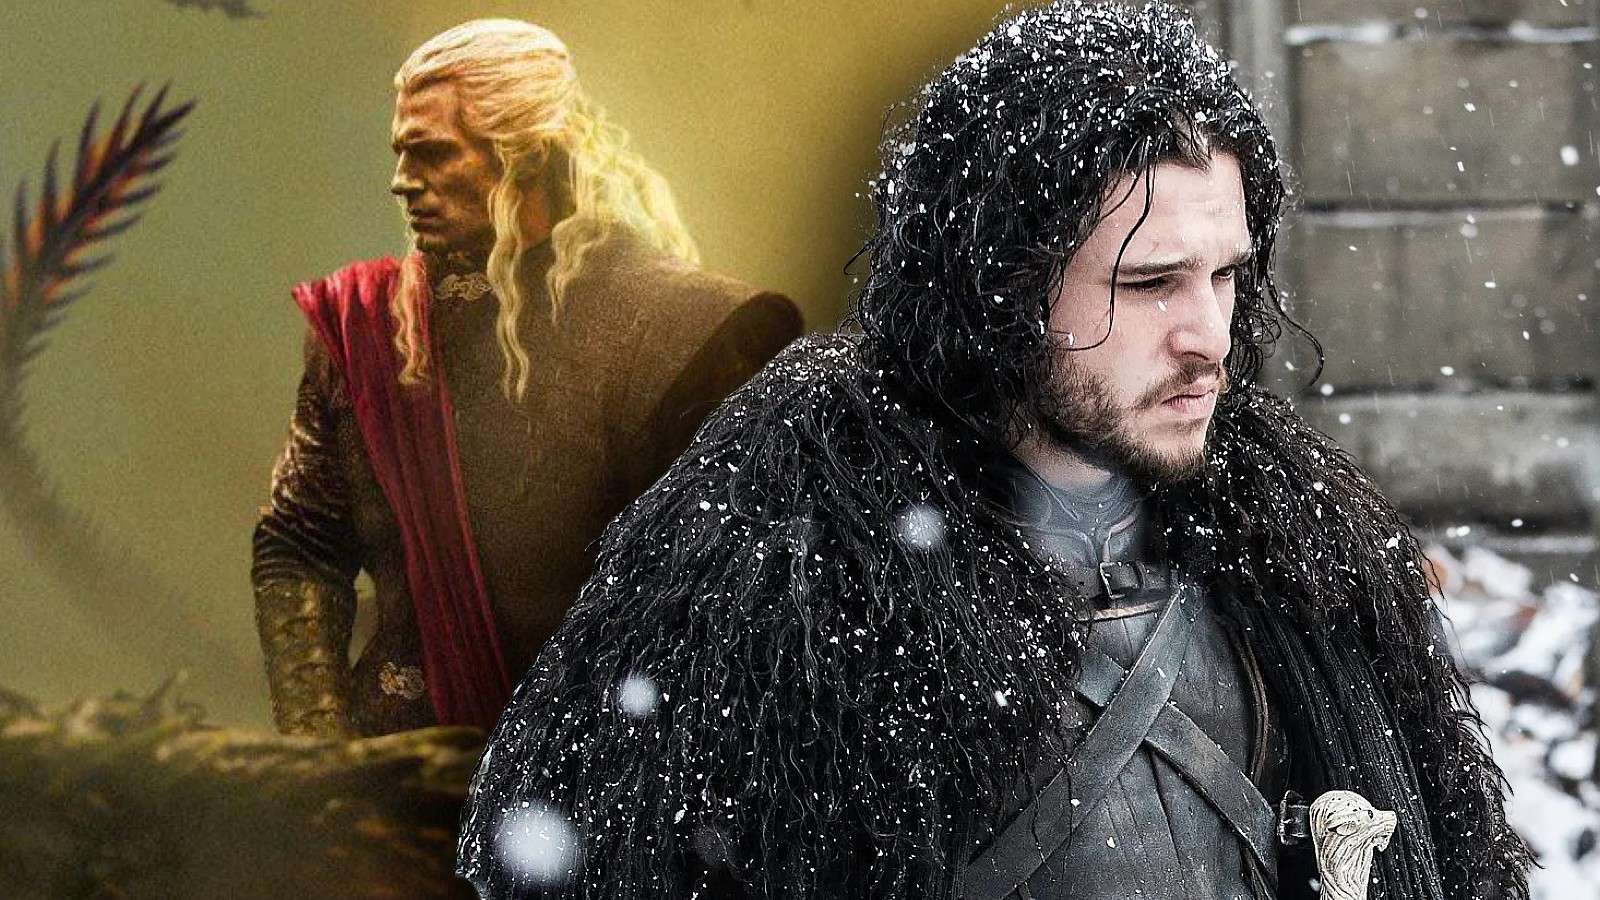 Henry Cavill in concept art as Aegon Targaryen and Jon Snow in Game of Thrones